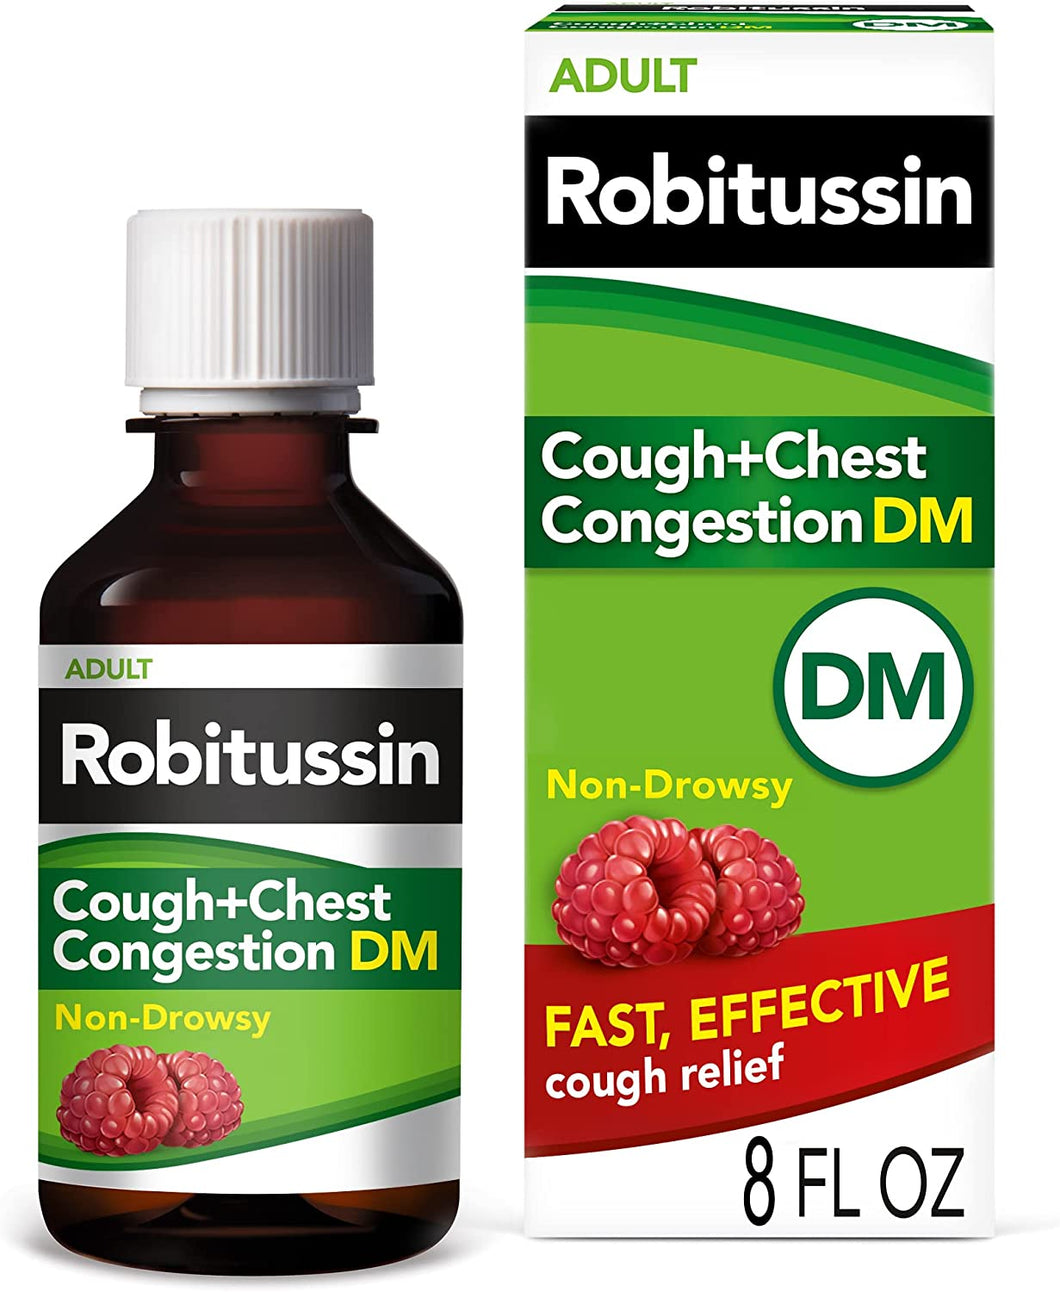 ROBITUSSIN MAXIMUM STRENGTH DM, COUGH + CHEST CONGESTION MEDICINE FOR ADULTS, BERRY FLAVOR (237ml)